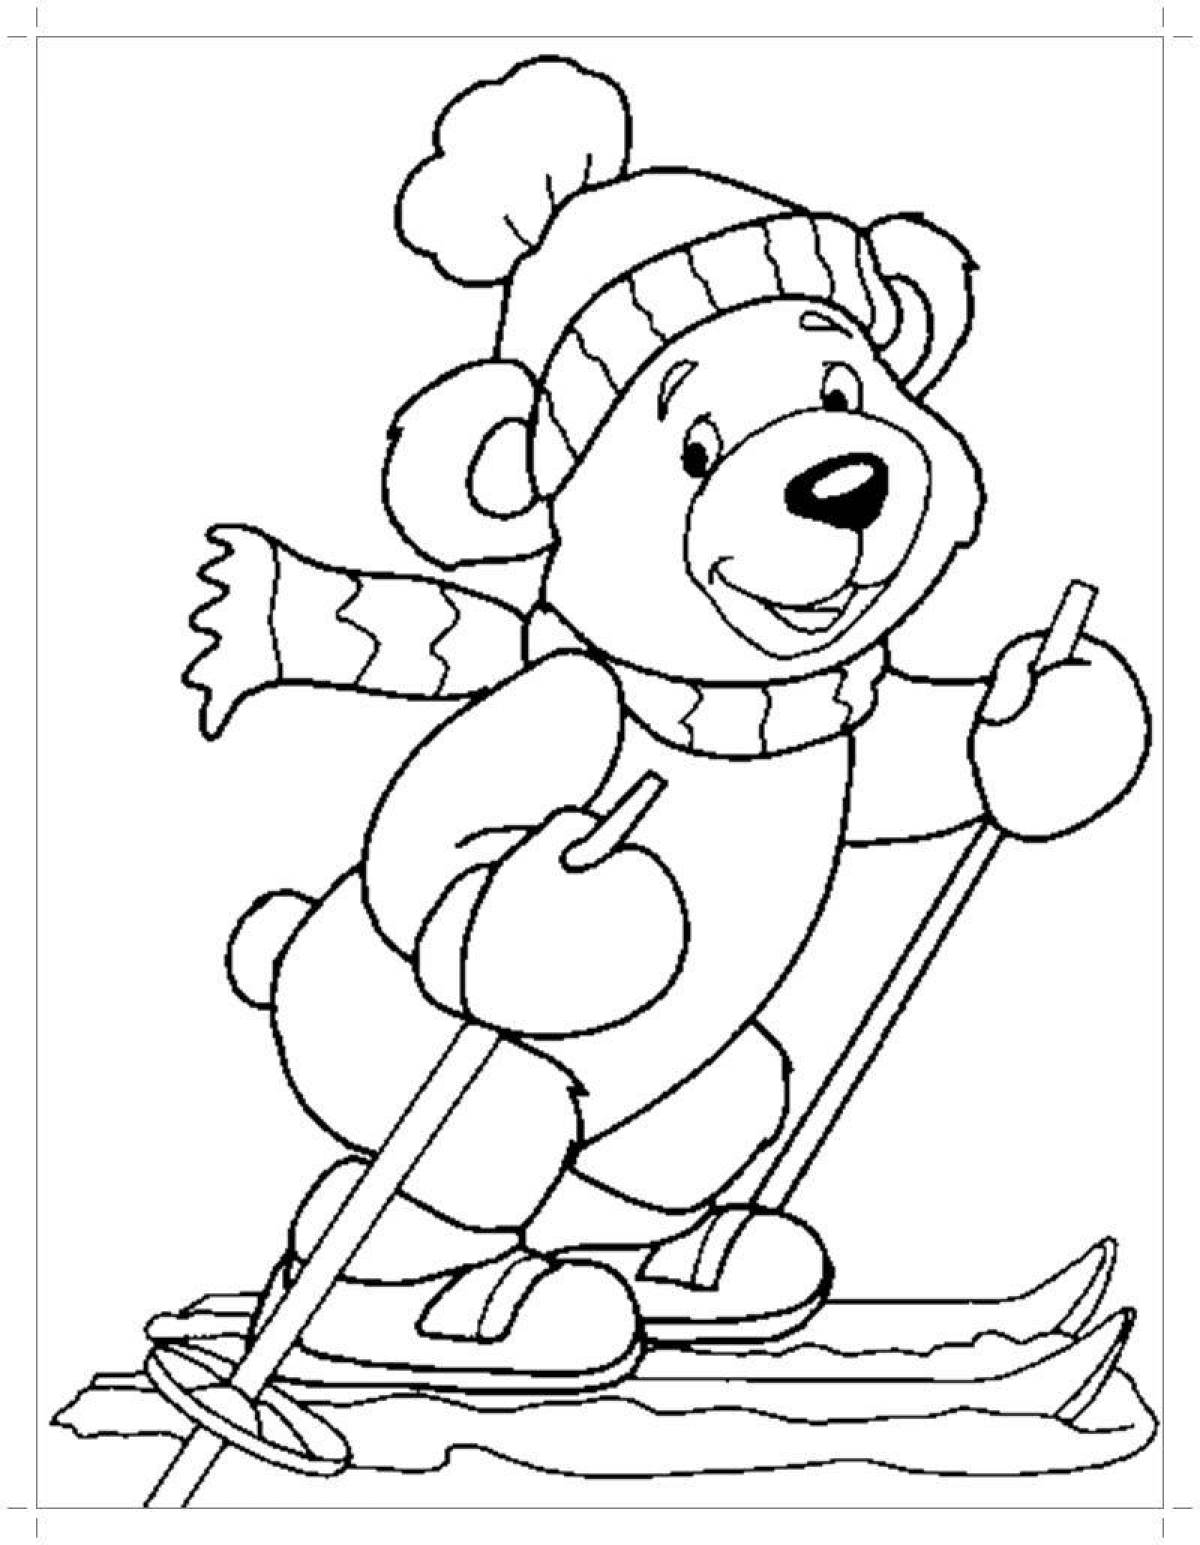 Merry winter coloring for children 2-3 years old